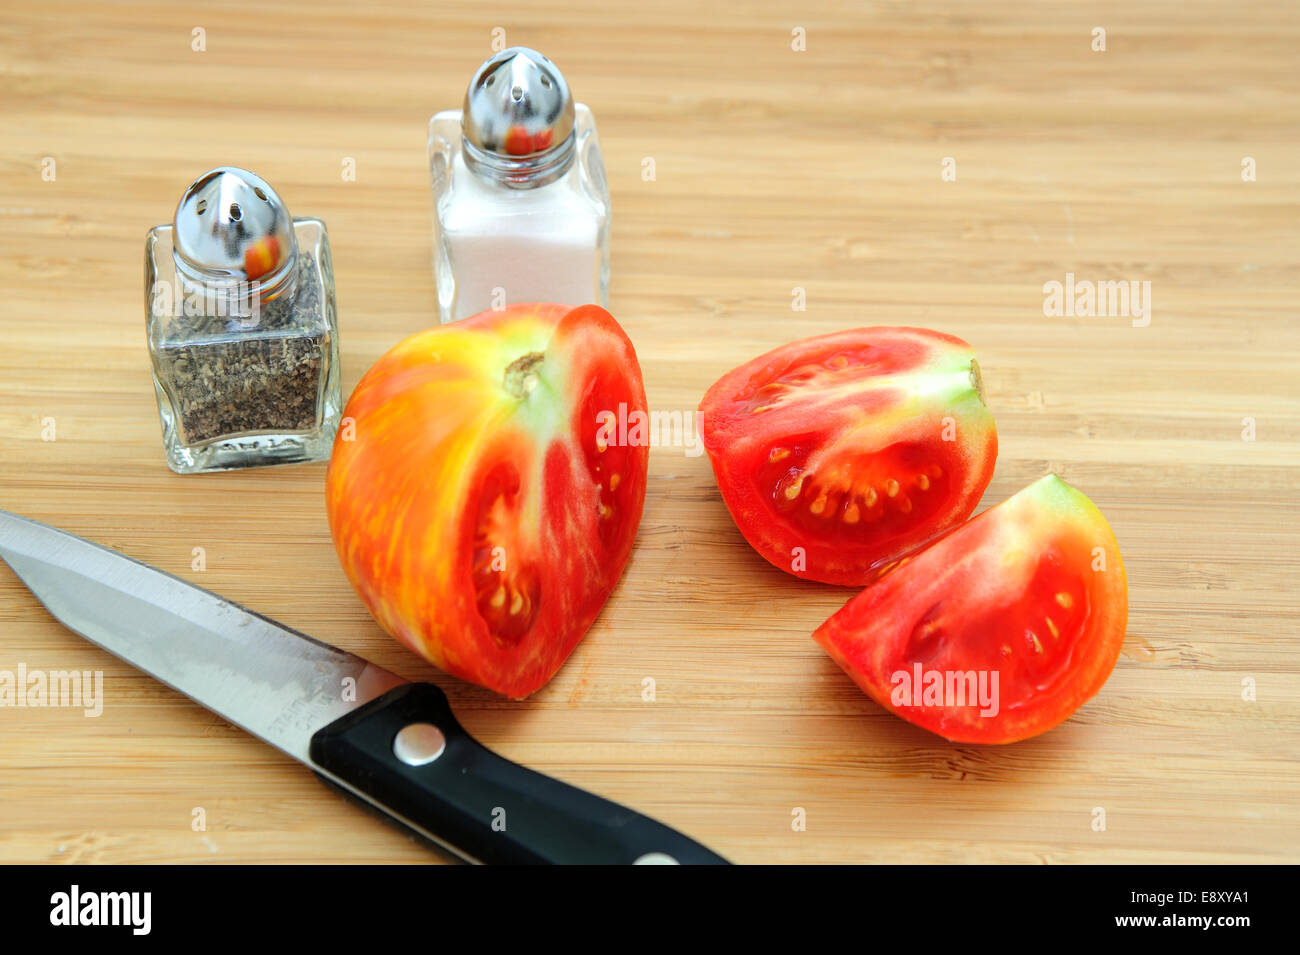 Red And Yellow Heirloom Tomato Stock Photo